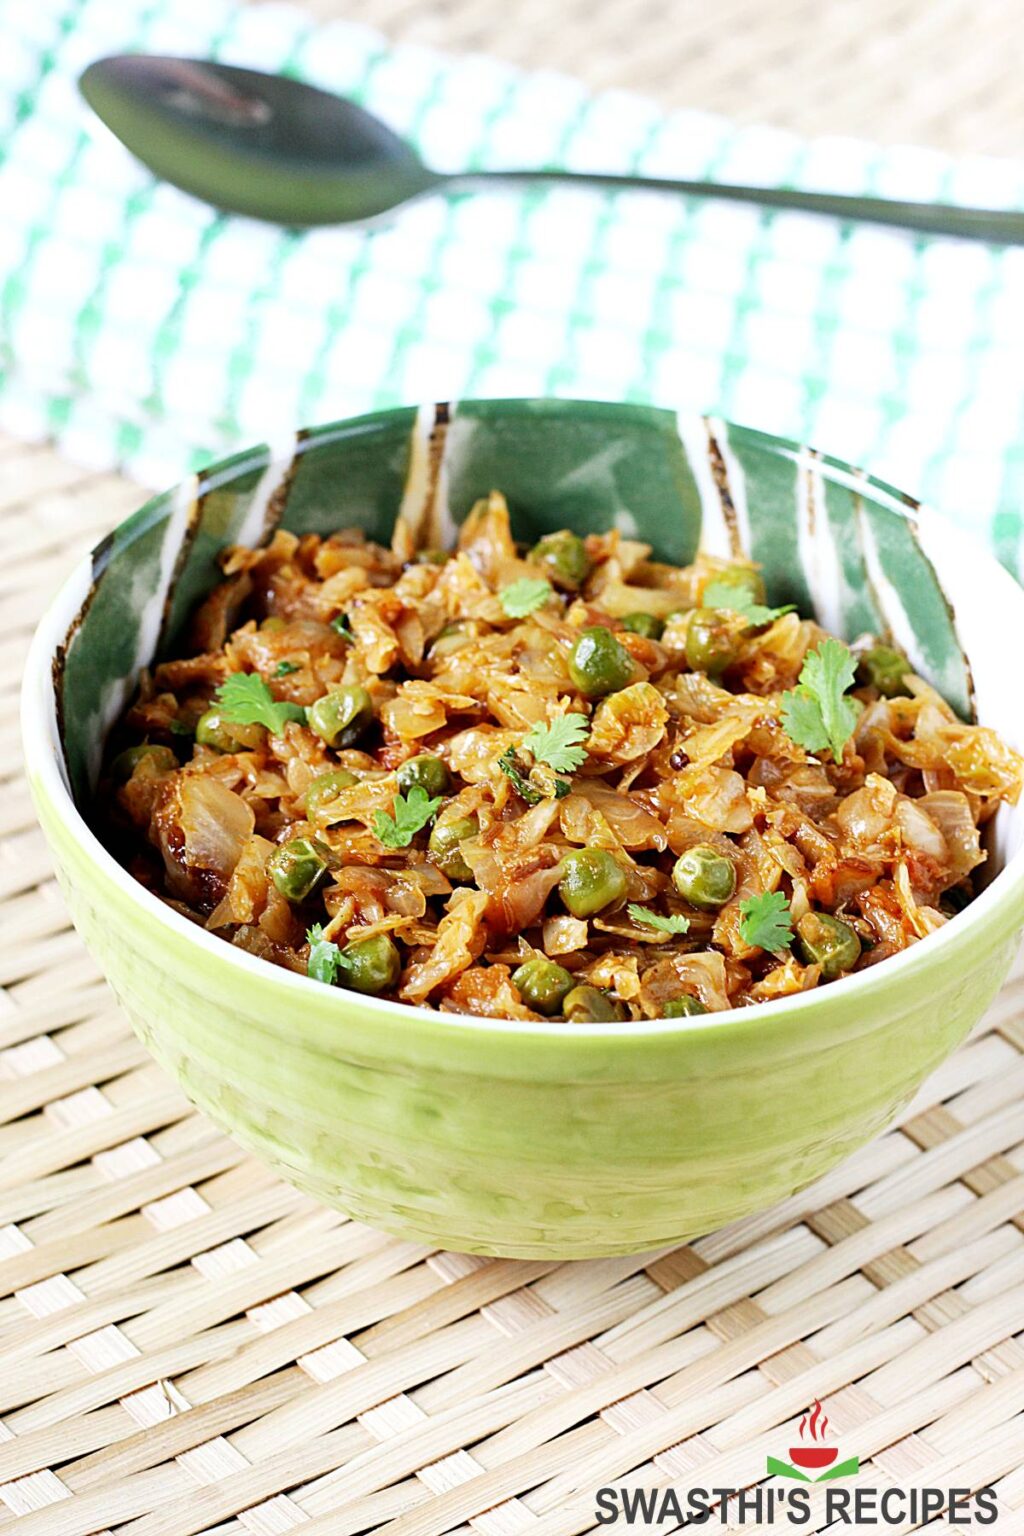 Cabbage Curry Recipe - Swasthi's Recipes